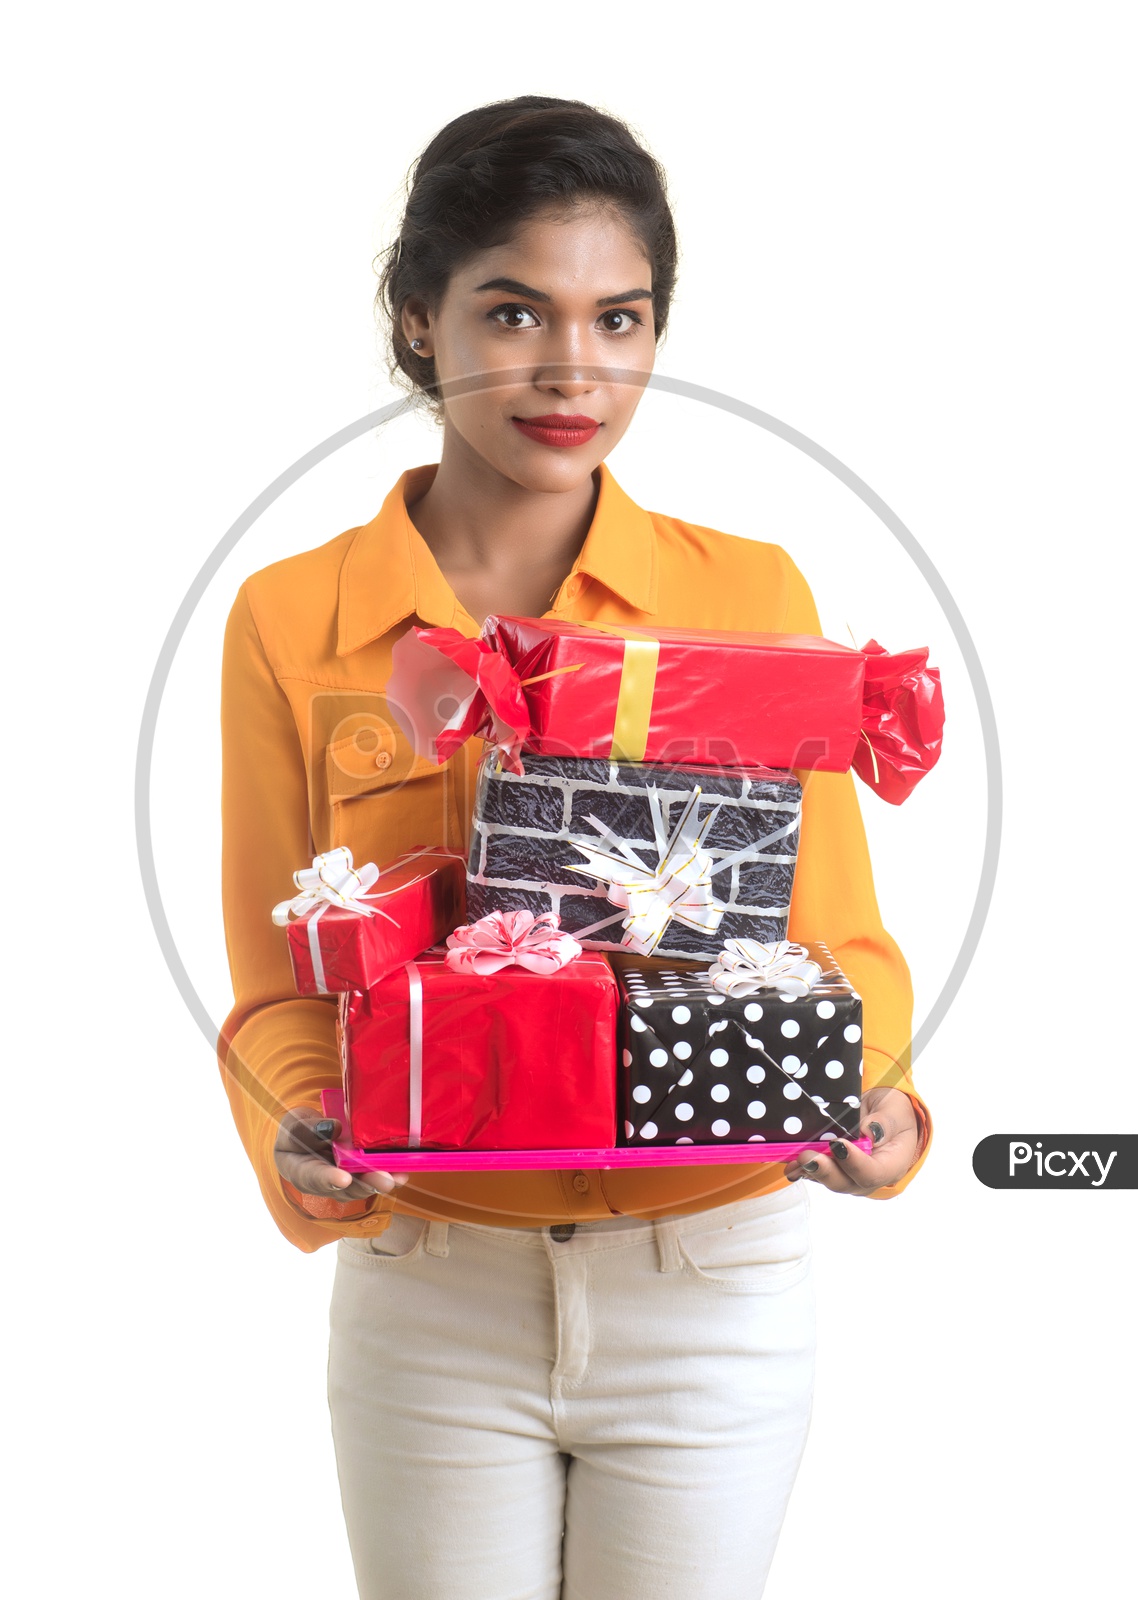 A Pretty Young Indian Girl With Gift Boxes Holding In Hand On an Isolated White Background